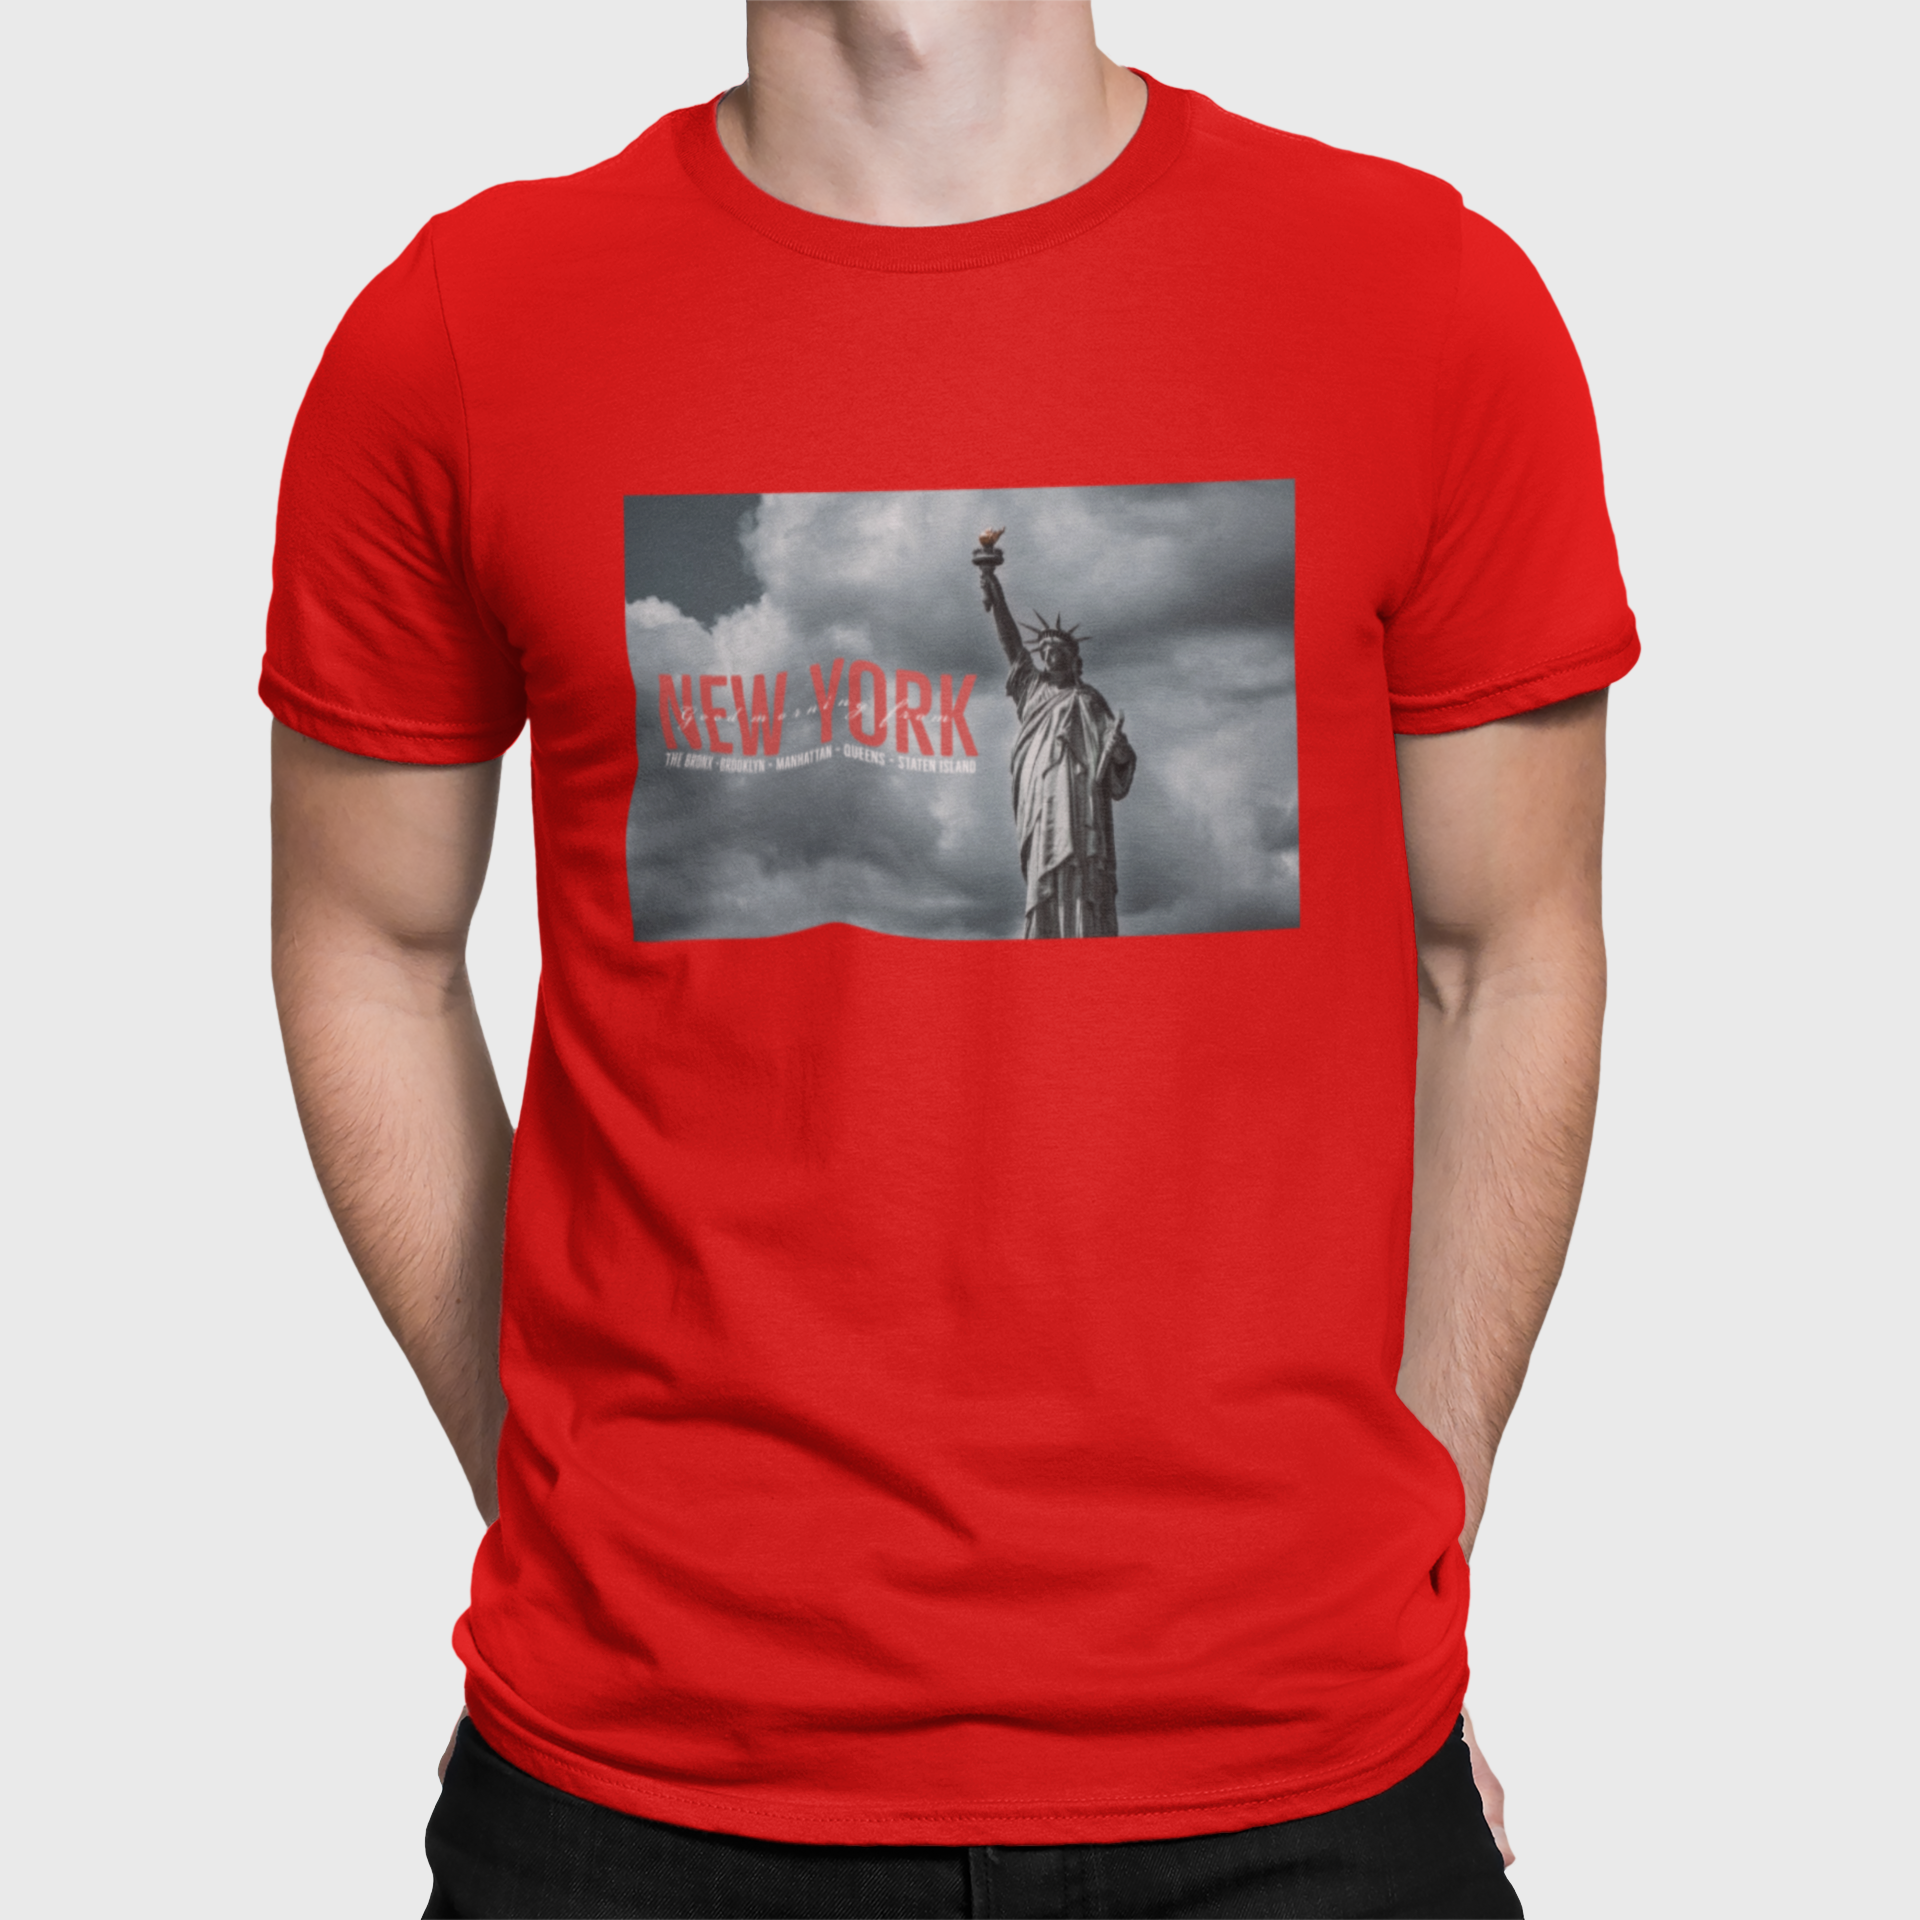 New York Red Round Neck T-Shirt for Men. 